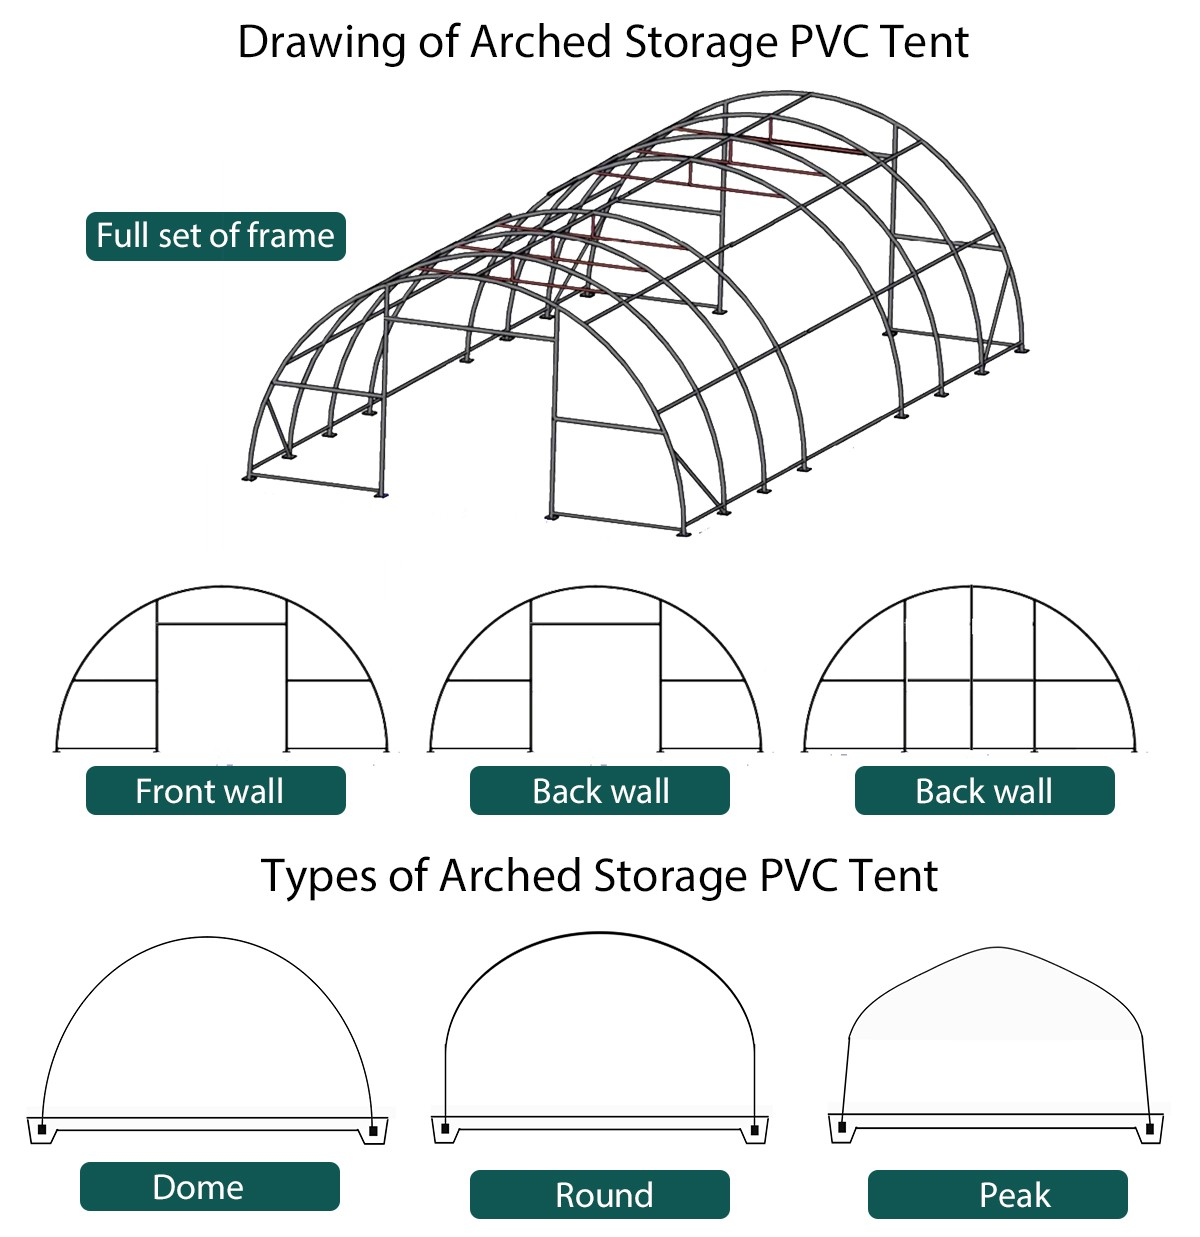 Drawing of arched storage PVC tent